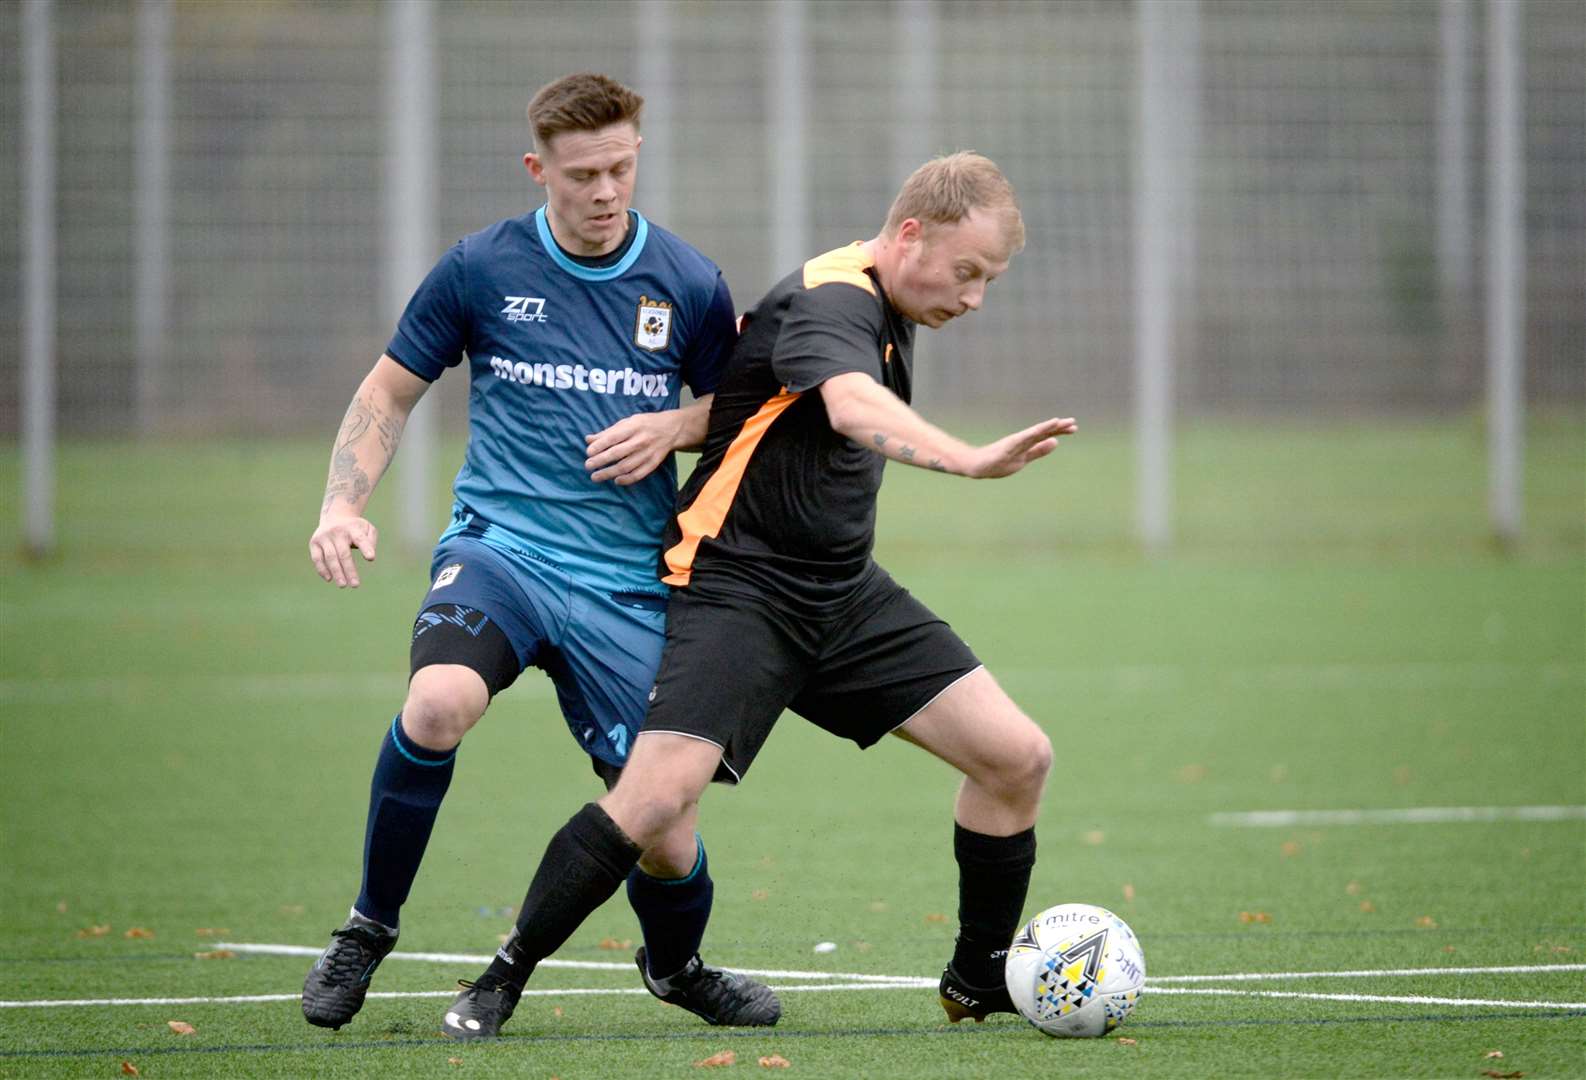 Loch Ness v Scourie at Canal Park October 2020..Sam Lucas of Scourie FC keeping the ball from Craig Mainland of Loch Ness FC..Picture: James Mackenzie..